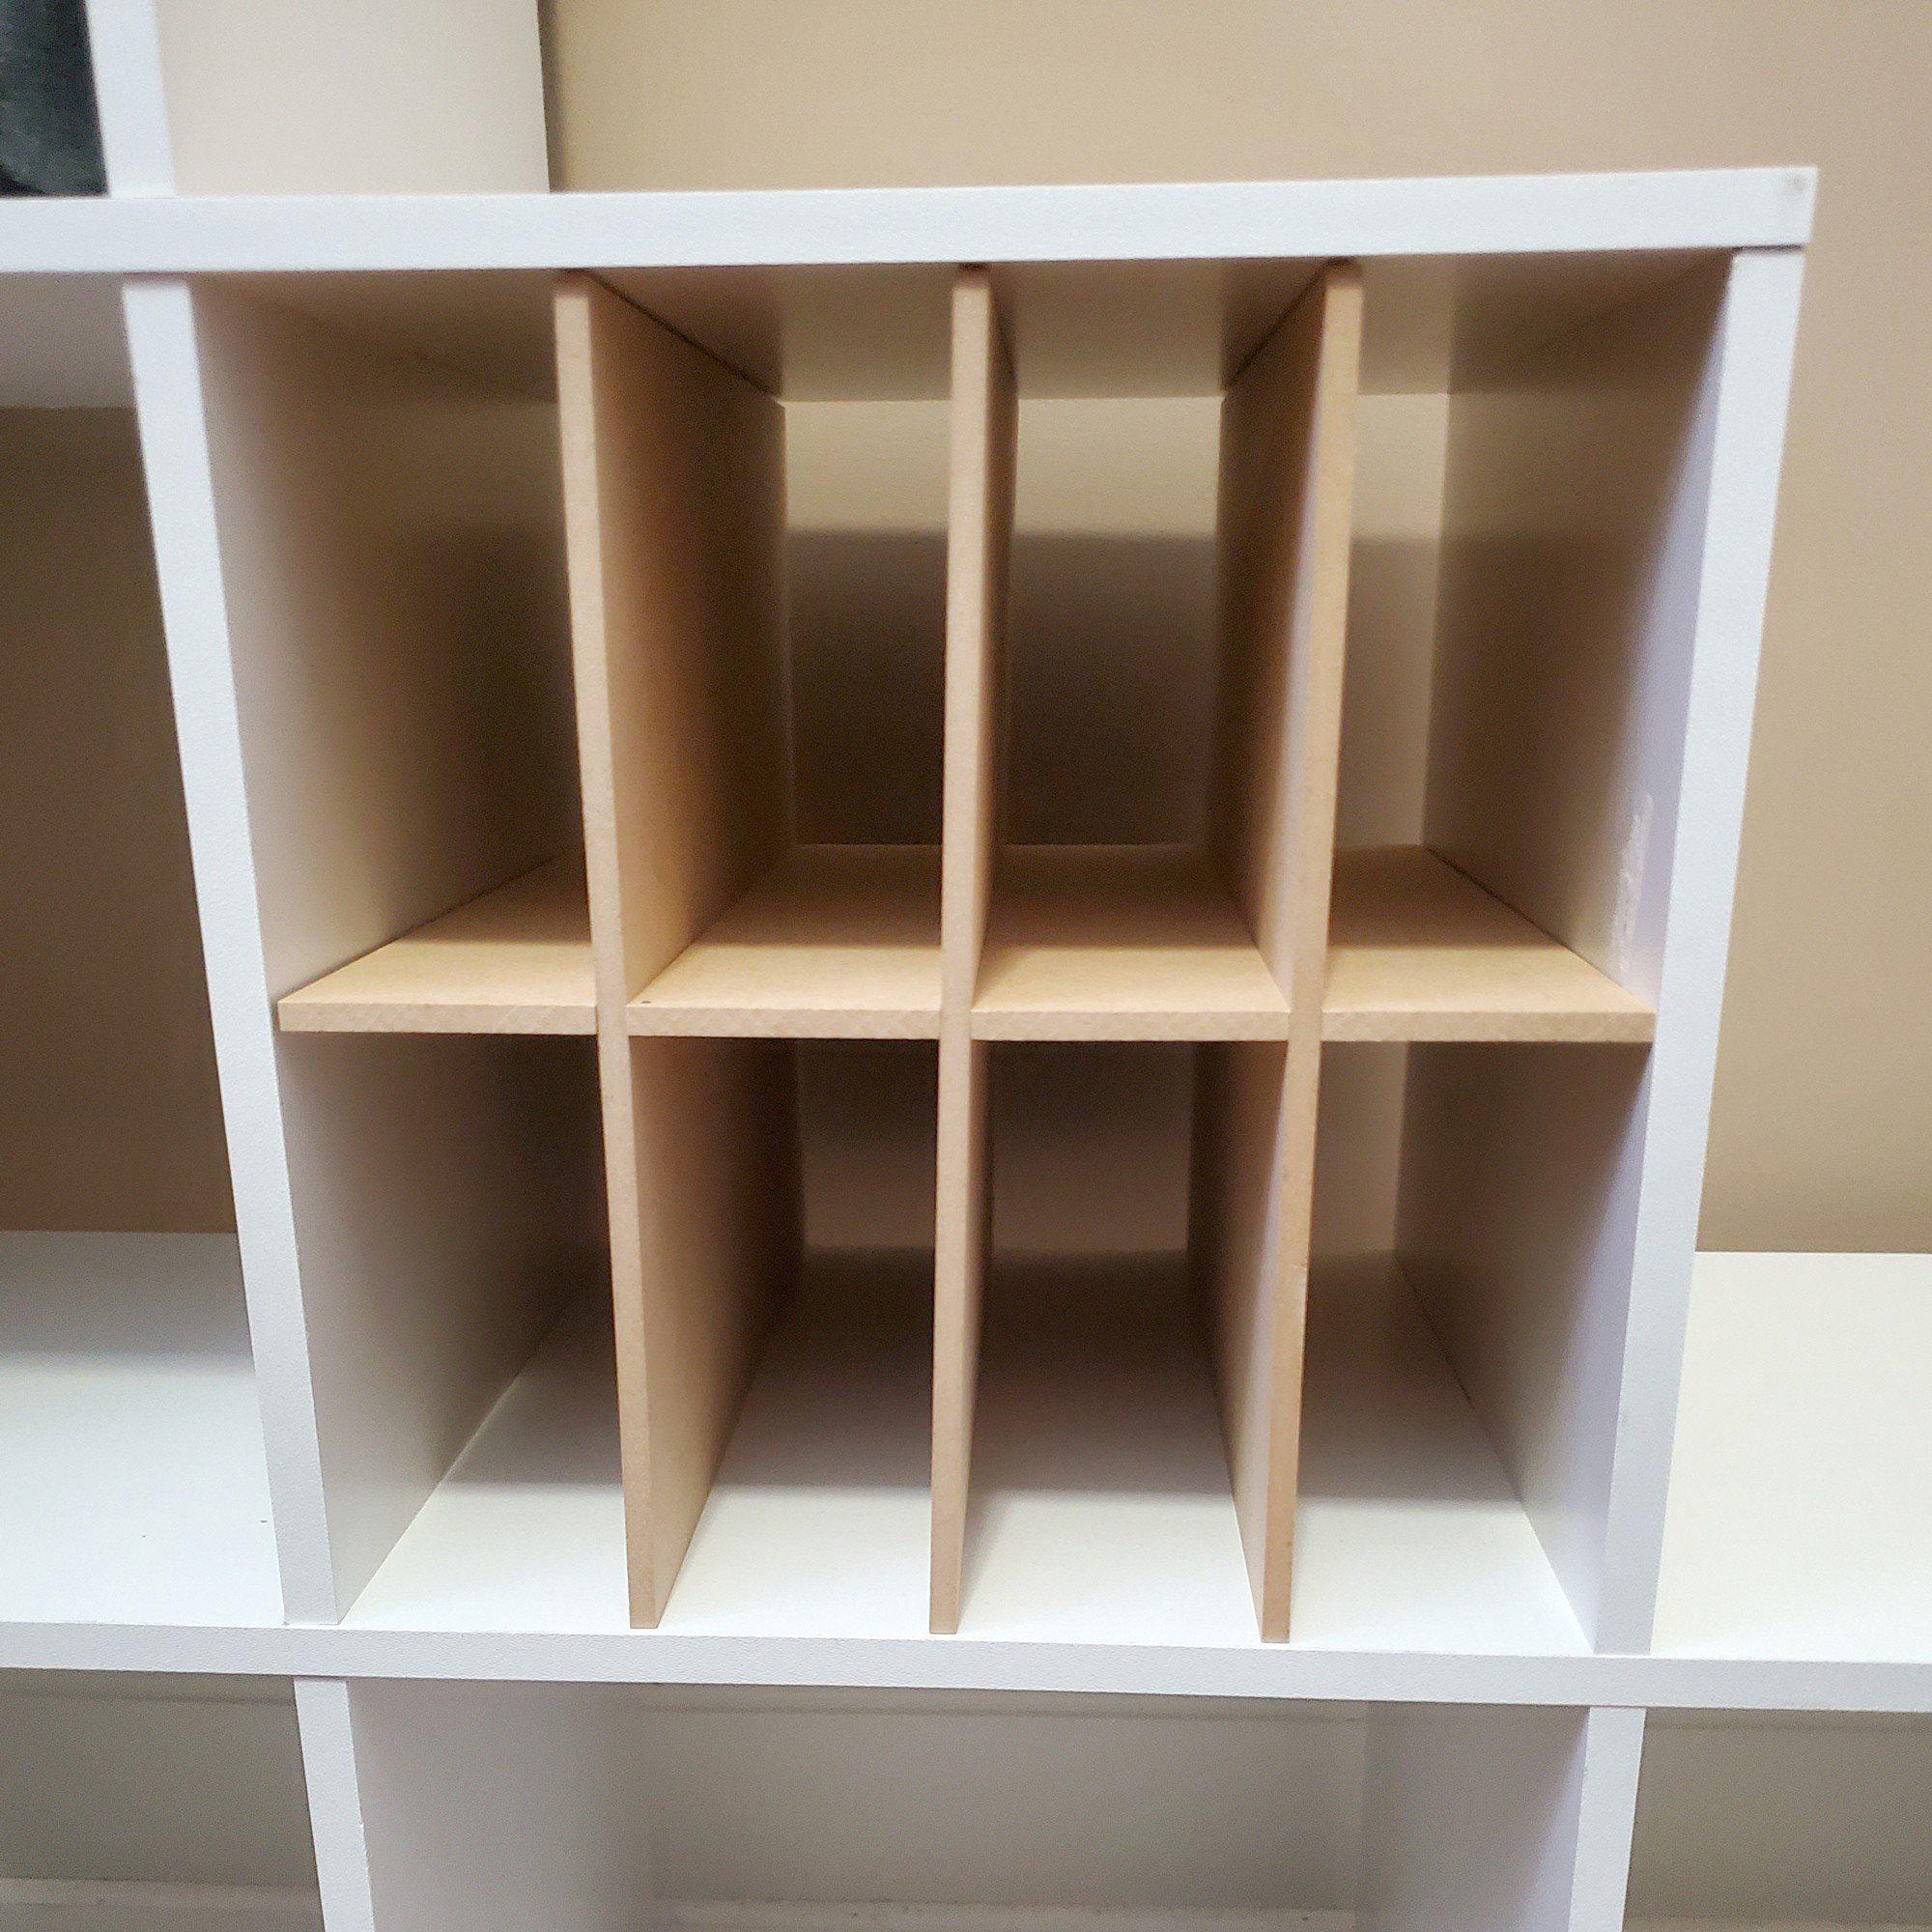 8 Cubby Cube Insert for Cube Storage Shelves-fun stuff-The Steady Hand